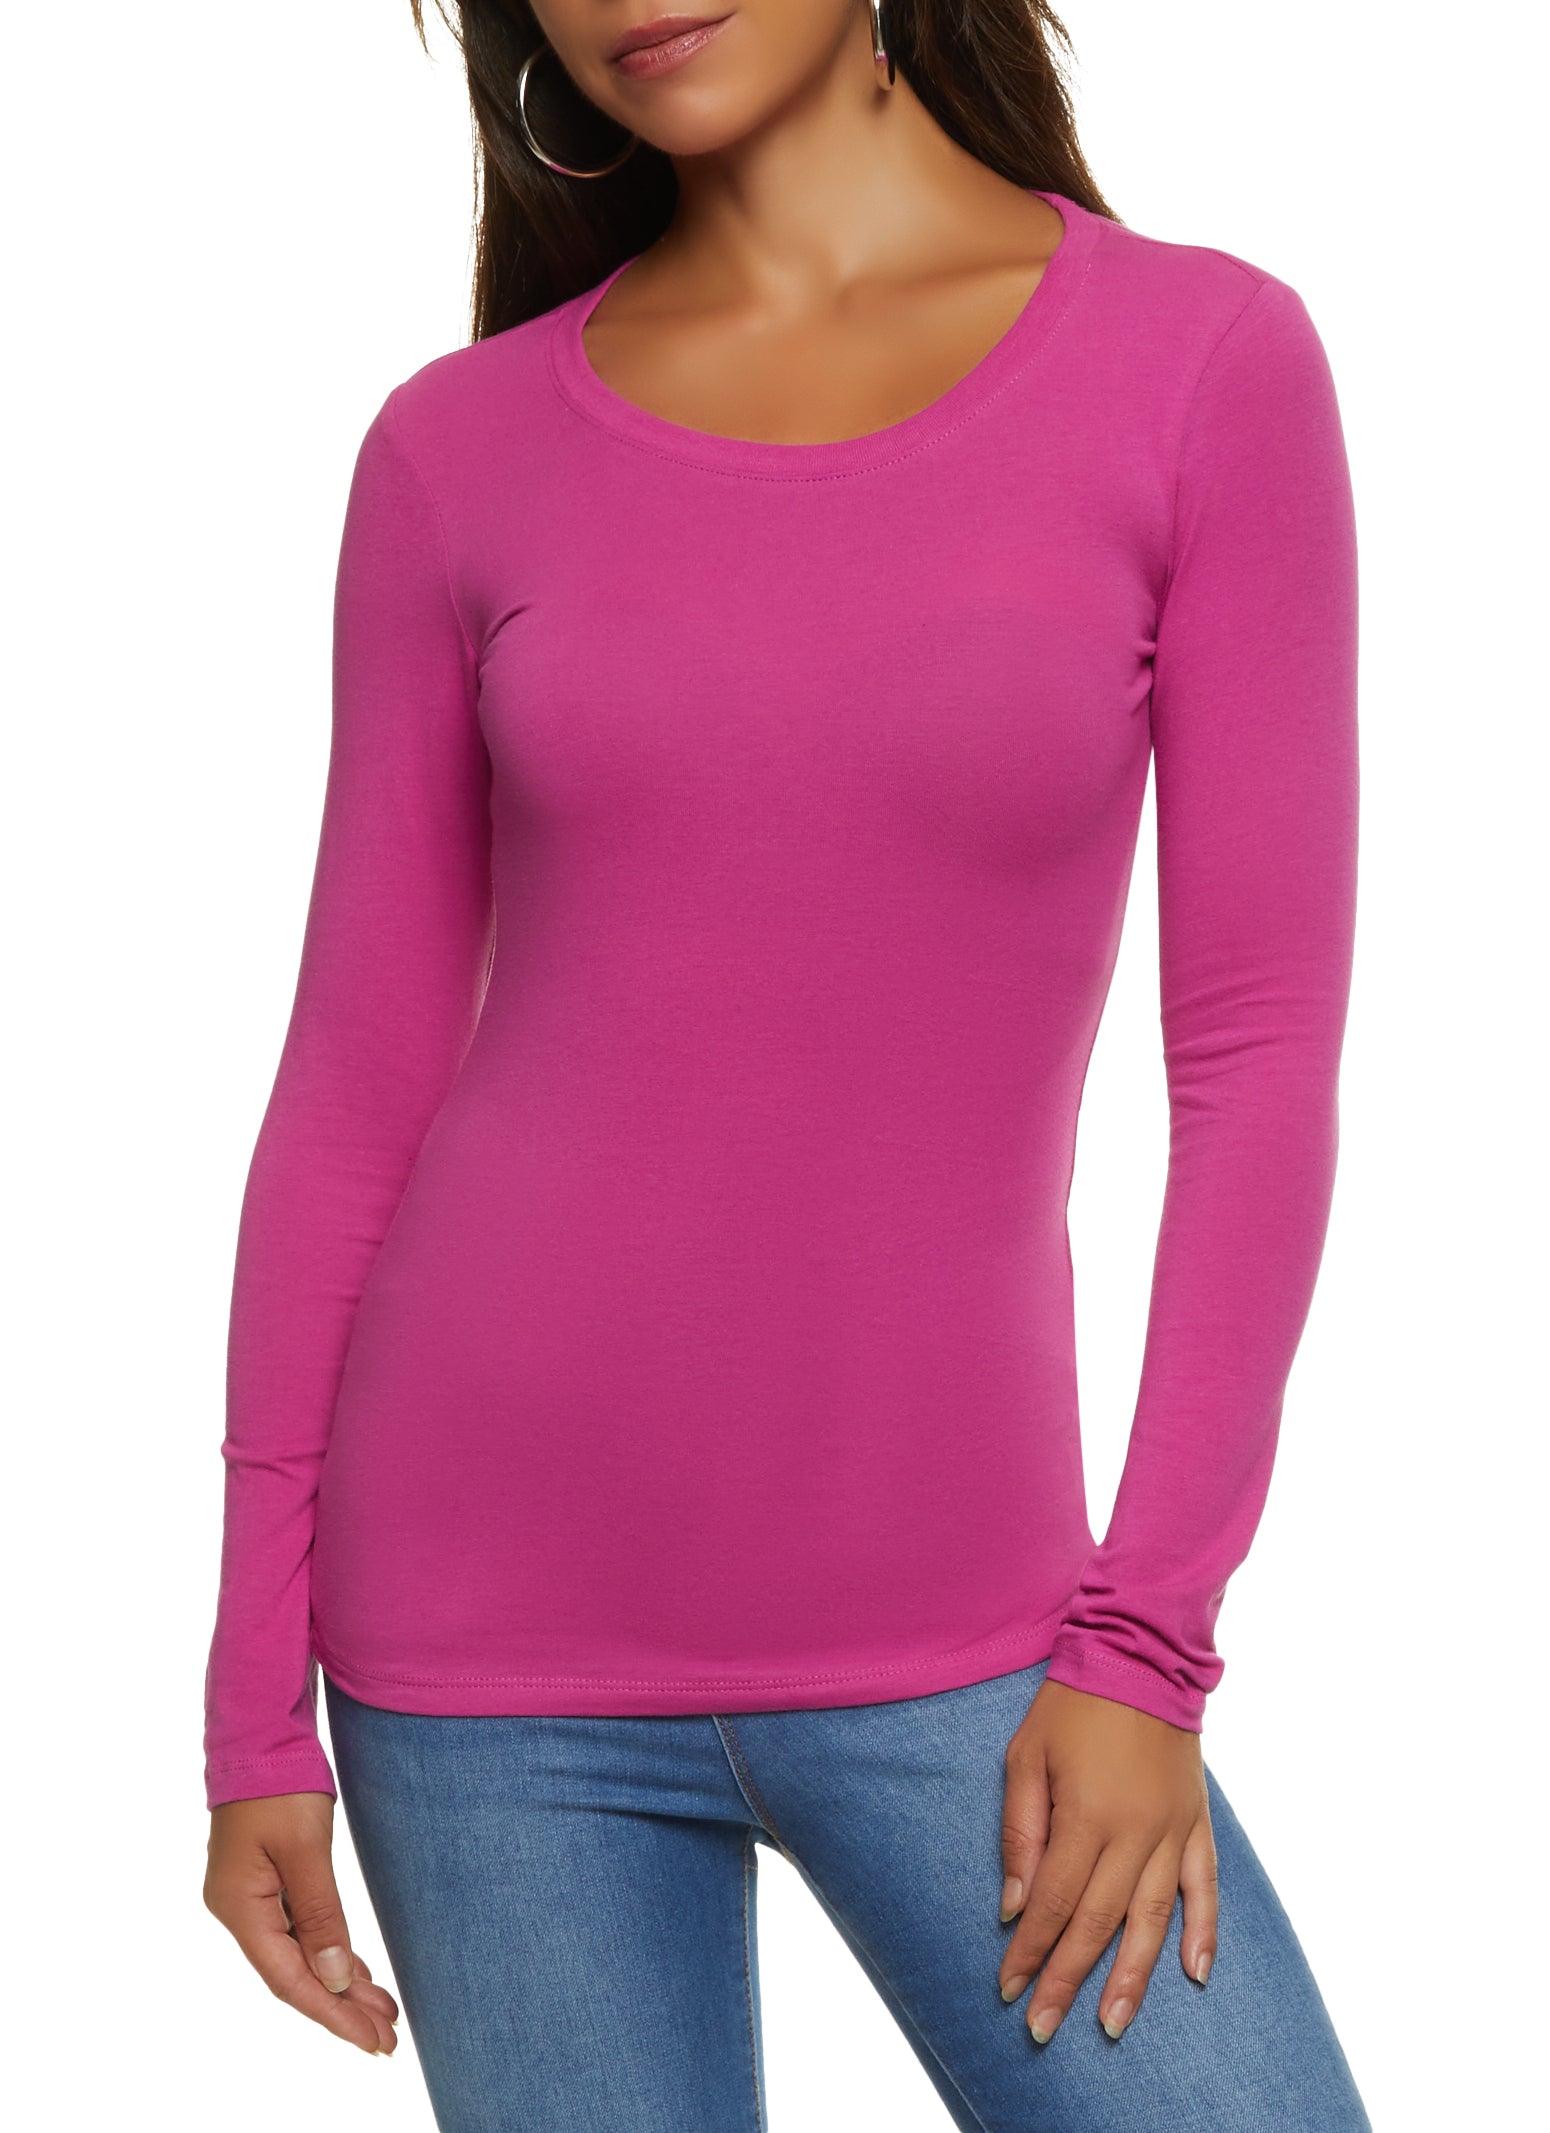 Womens Pink Tops, Everyday Low Prices